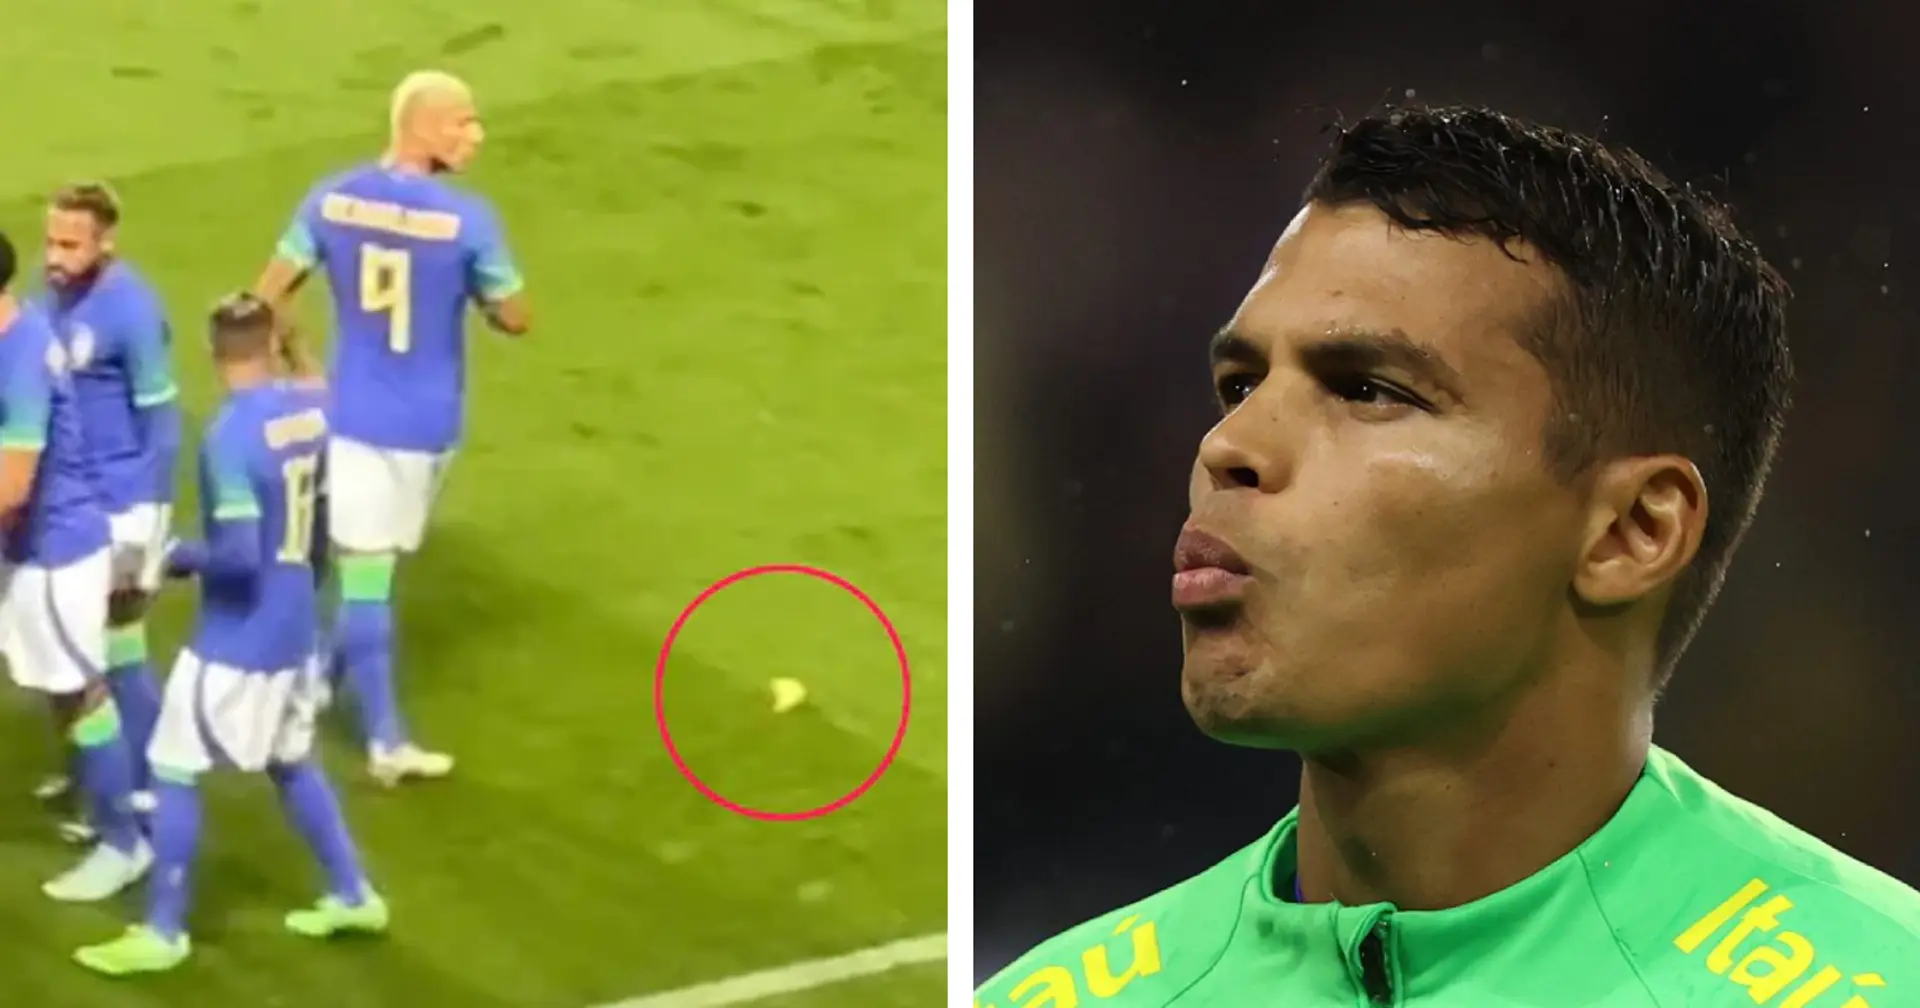 'This is not acceptable': Thiago Silva outraged after Brazil teammate Richarlison hit with banana during Tunis clash